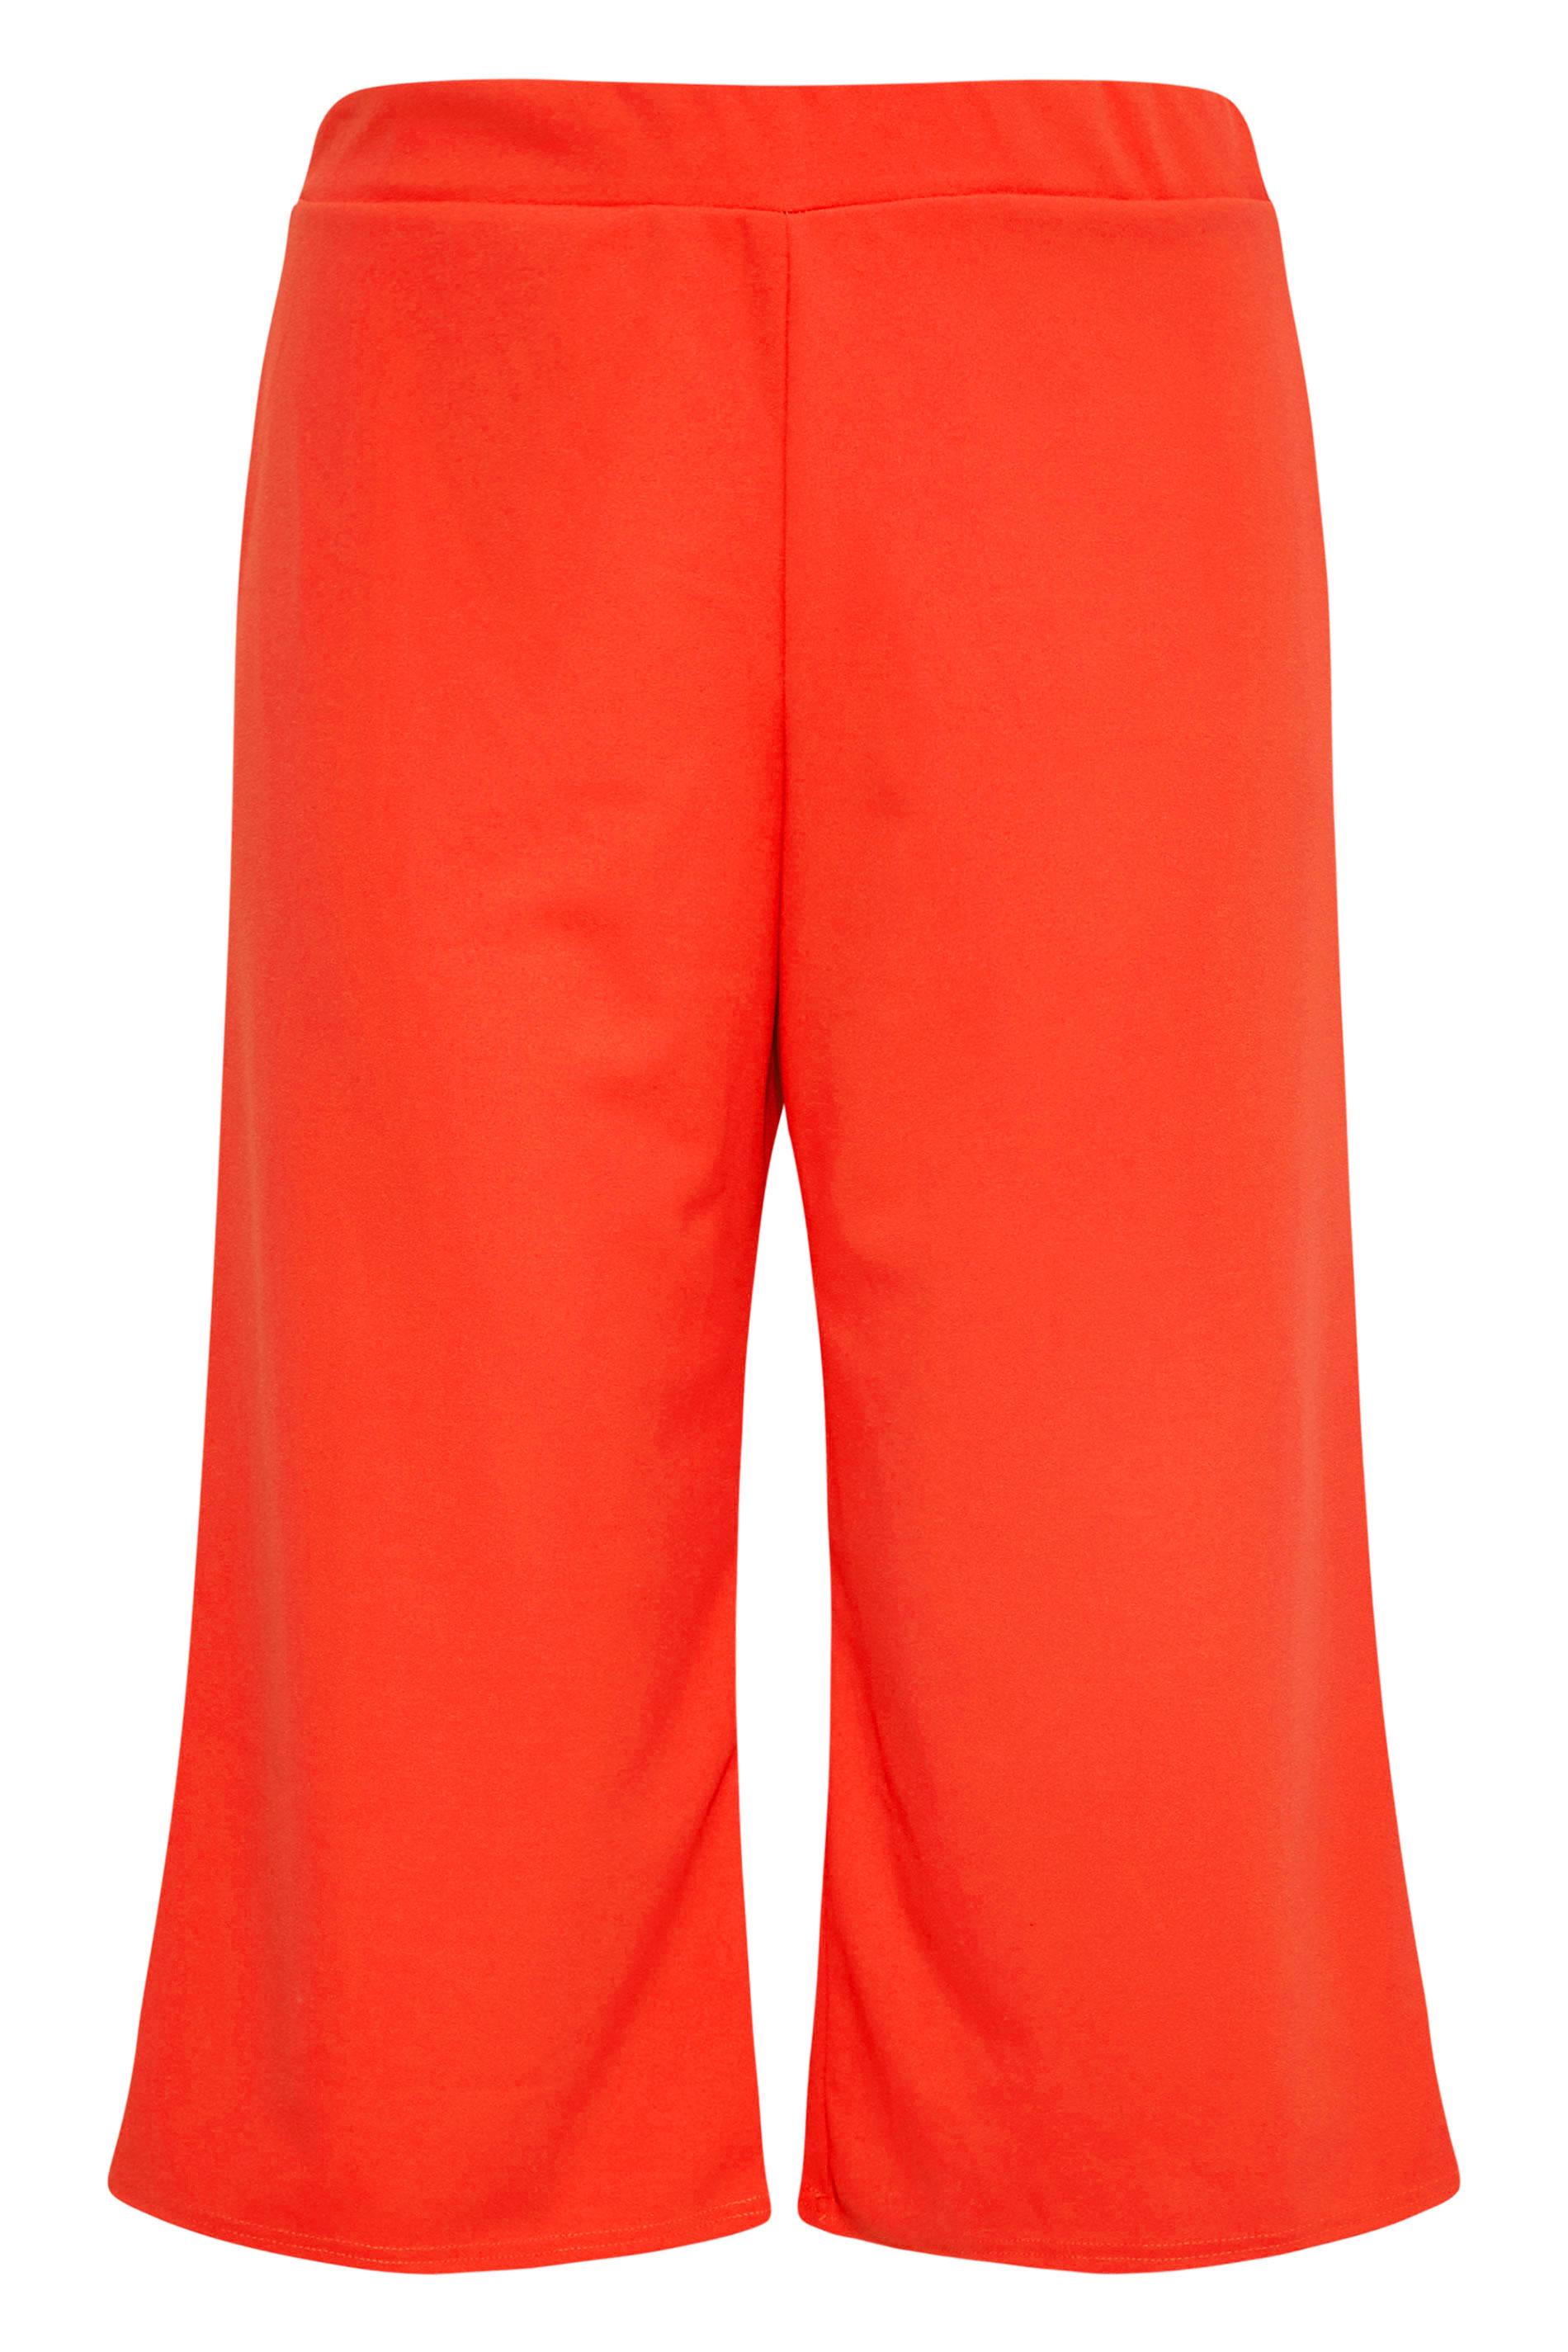 Pantacourts Grande Taille Grande taille  Jupes culottes | YOURS LONDON - Jupe-Culotte Orange Coupe Ample - GT04975